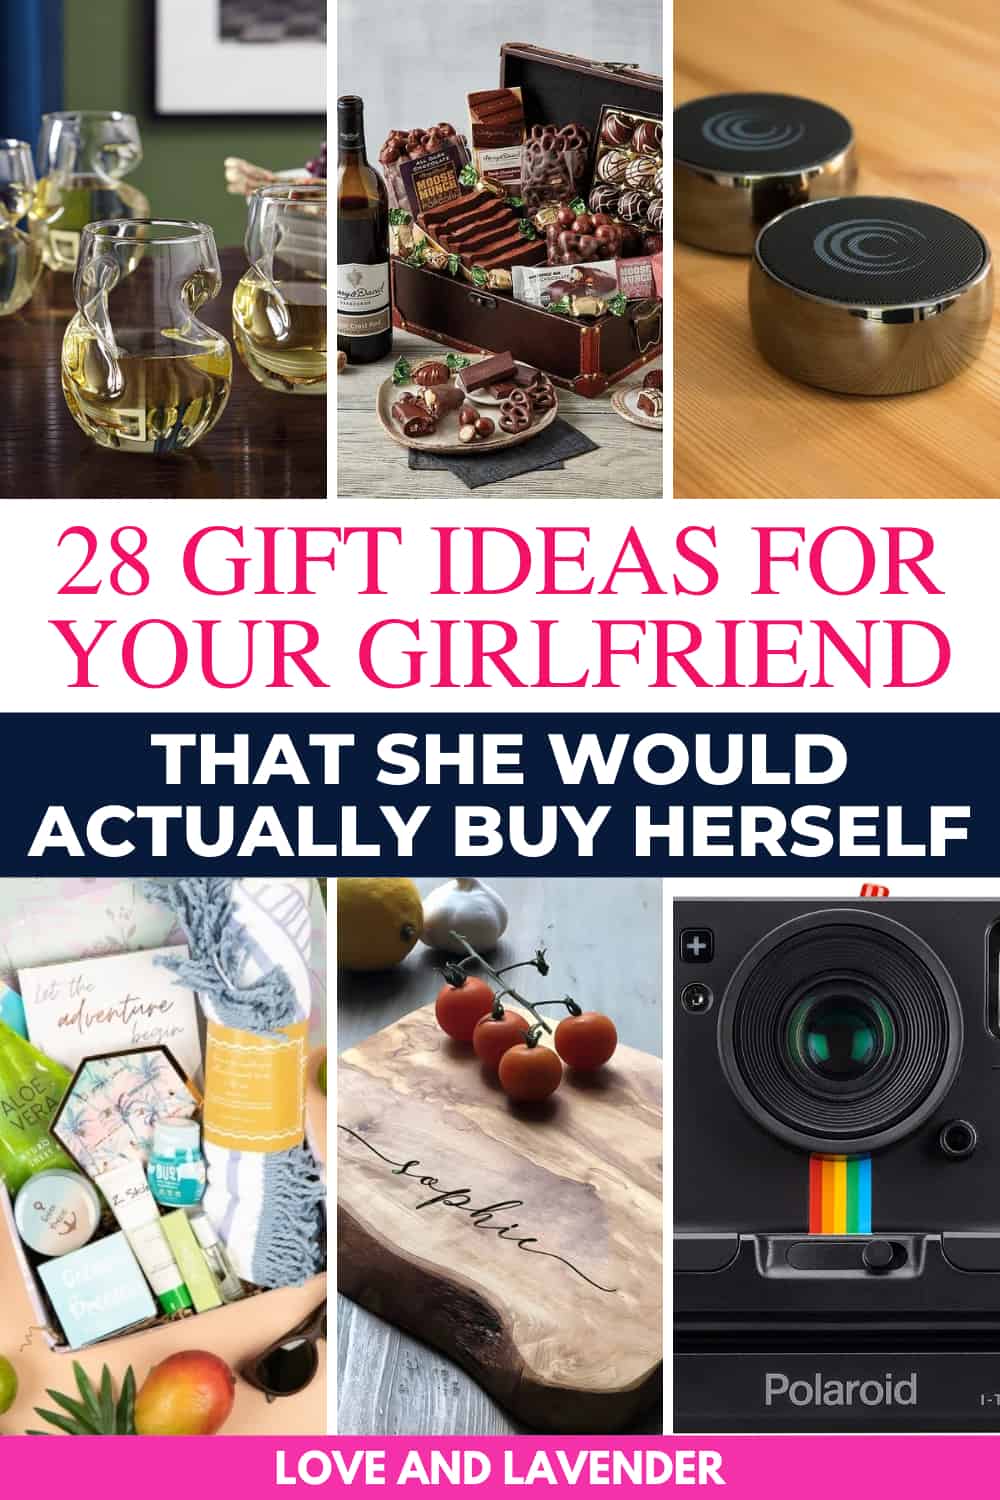 28 Gift Ideas for Your Girlfriend - Pinterest pin